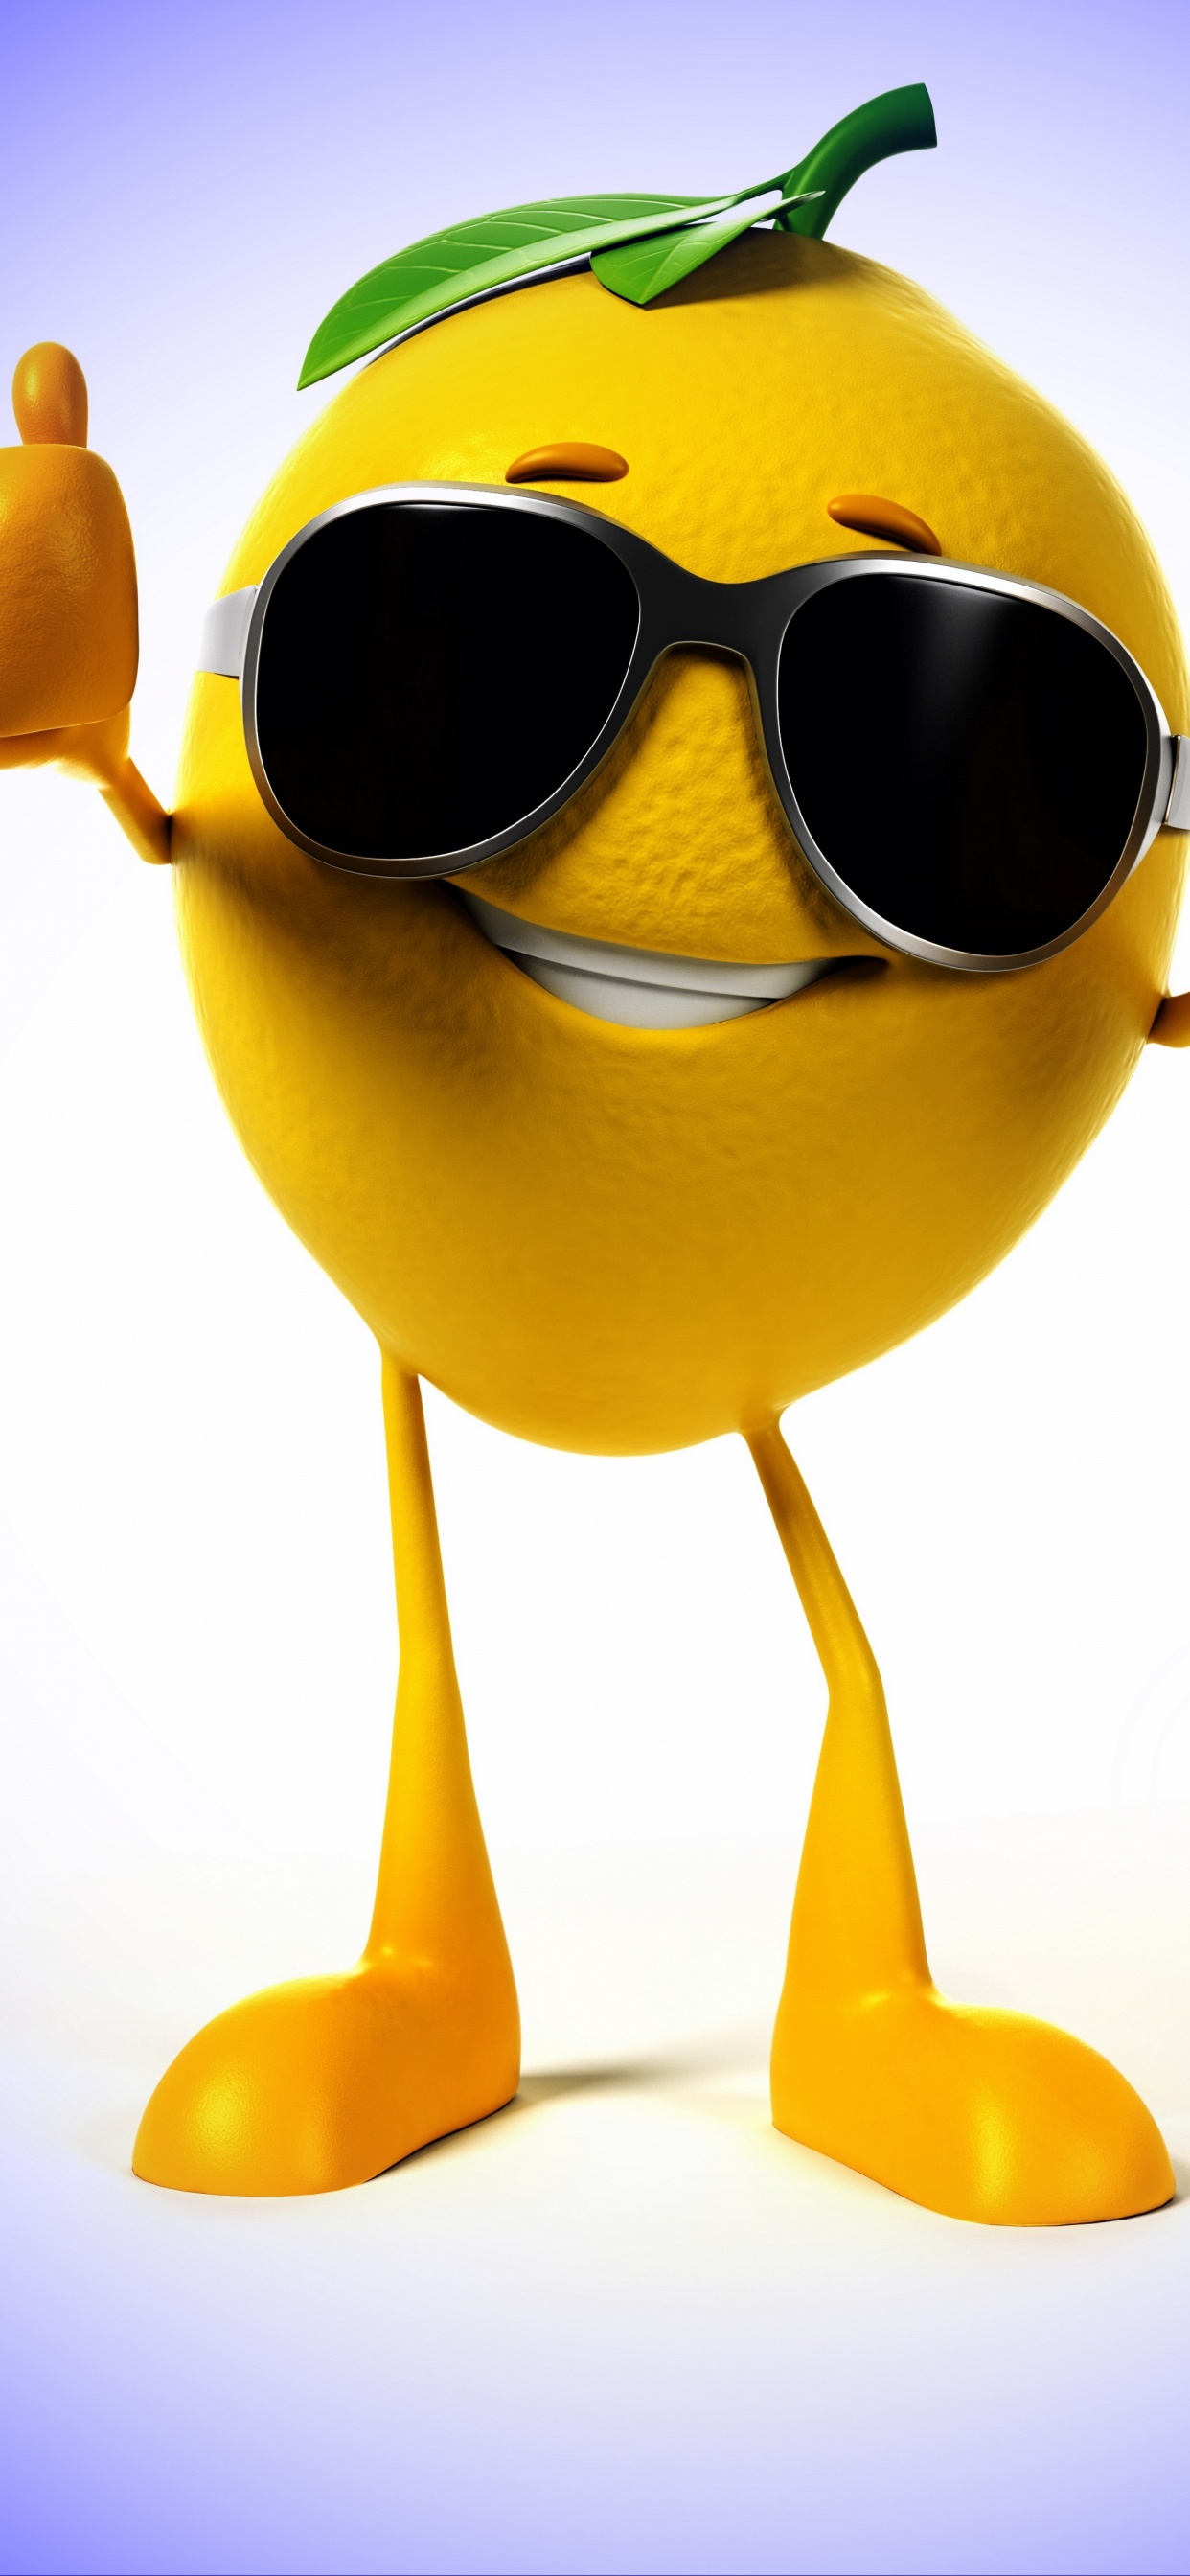 Yellow and Green Frog Wearing Sunglasses. Wallpaper in 1242x2688 Resolution